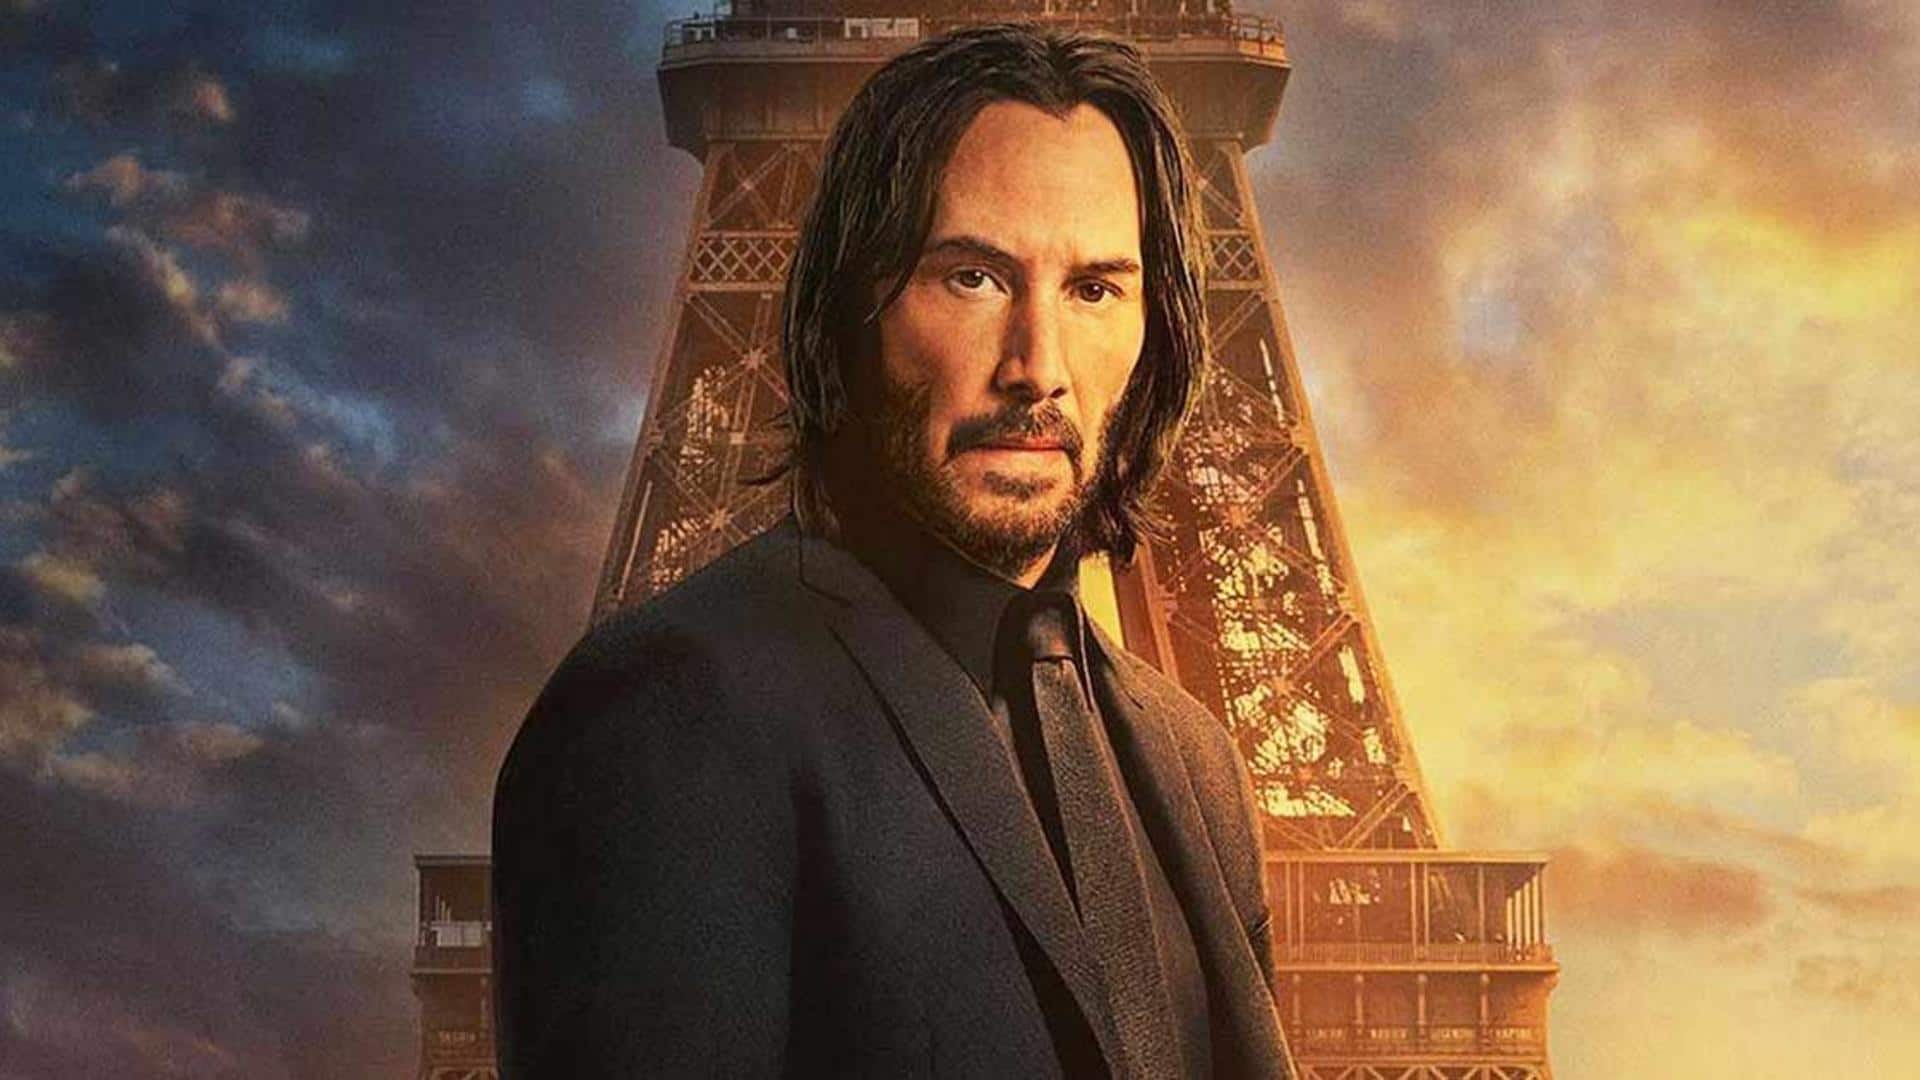 Box office: 'John Wick 4' shows stable growth in India